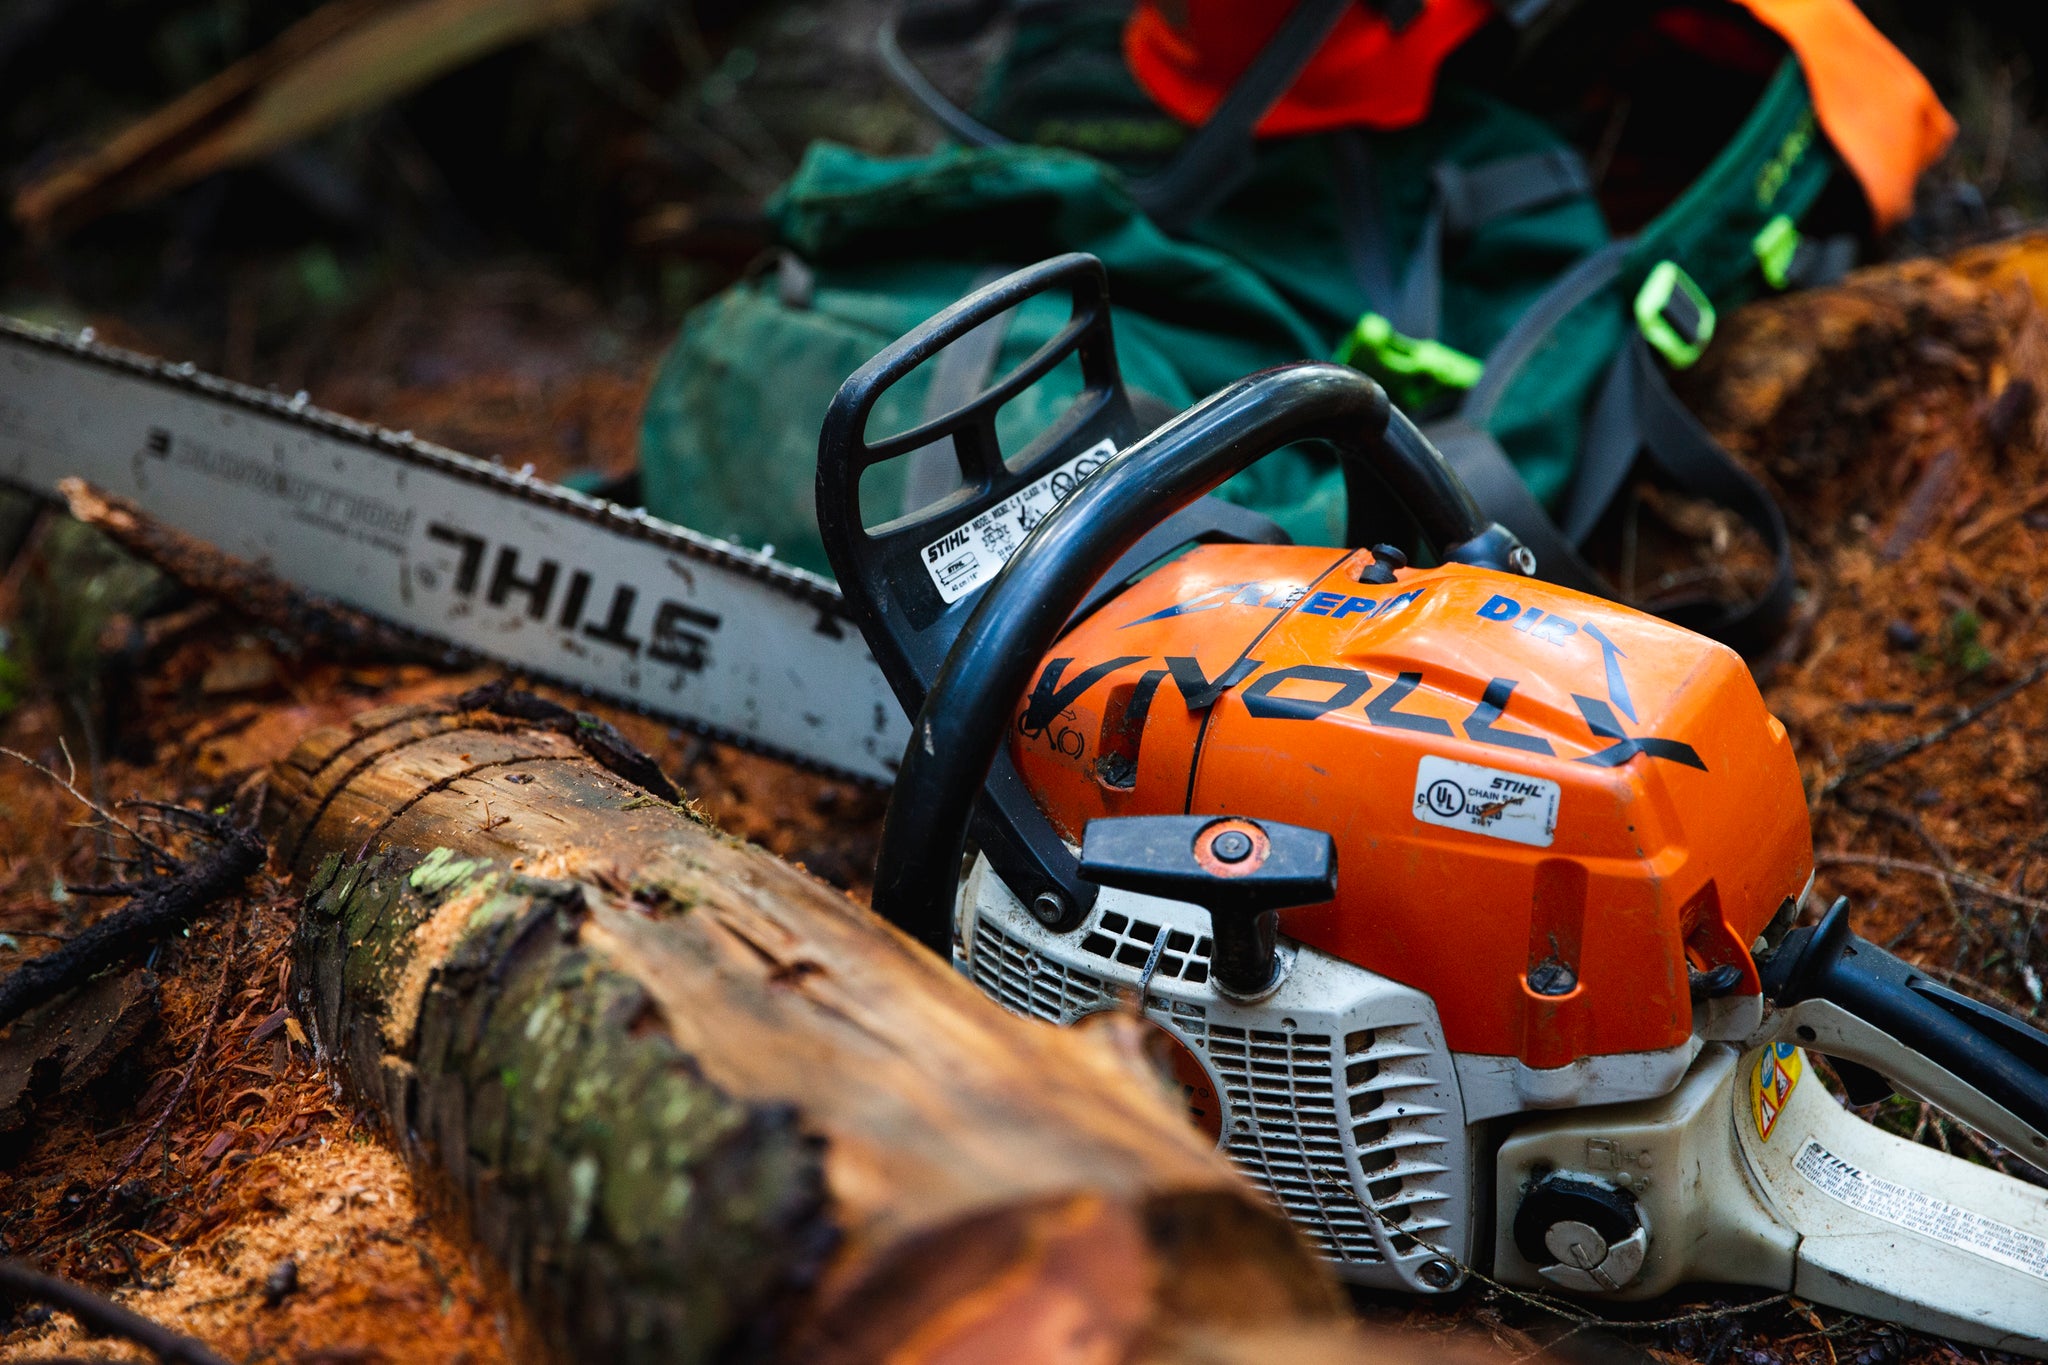 Chainsaw with a Knolly logo sticker